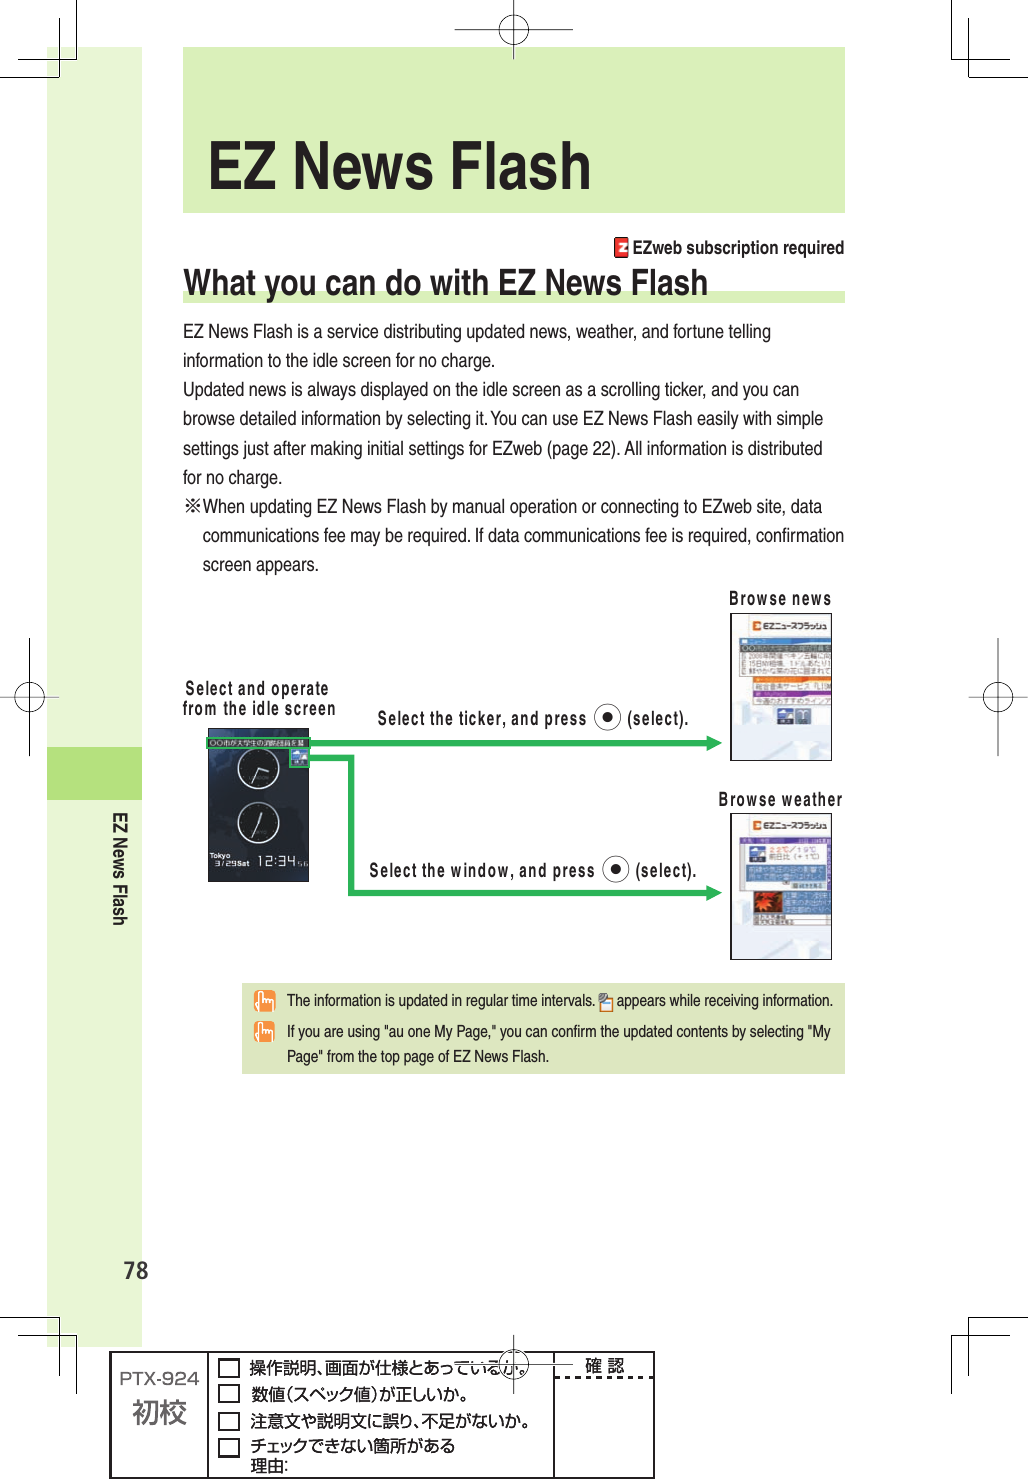 EZ News Flash78 EZweb subscription requiredWhat you can do with EZ News FlashEZ News Flash is a service distributing updated news, weather, and fortune telling information to the idle screen for no charge.Updated news is always displayed on the idle screen as a scrolling ticker, and you can browse detailed information by selecting it. You can use EZ News Flash easily with simple settings just after making initial settings for EZweb (page 22). All information is distributed for no charge.※ When updating EZ News Flash by manual operation or connecting to EZweb site, data communications fee may be required. If data communications fee is required, conﬁ rmation screen appears.3ELECTANDOPERATEFROMTHEIDLESCREEN&quot;ROWSENEWS3ELECTTHETICKERANDPRESSpSELECT&quot;ROWSEWEATHER3ELECTTHEWINDOWANDPRESSpSELECT  The information is updated in regular time intervals.   appears while receiving information.  If you are using &quot;au one My Page,&quot; you can conﬁ rm the updated contents by selecting &quot;My Page&quot; from the top page of EZ News Flash. EZ News Flash